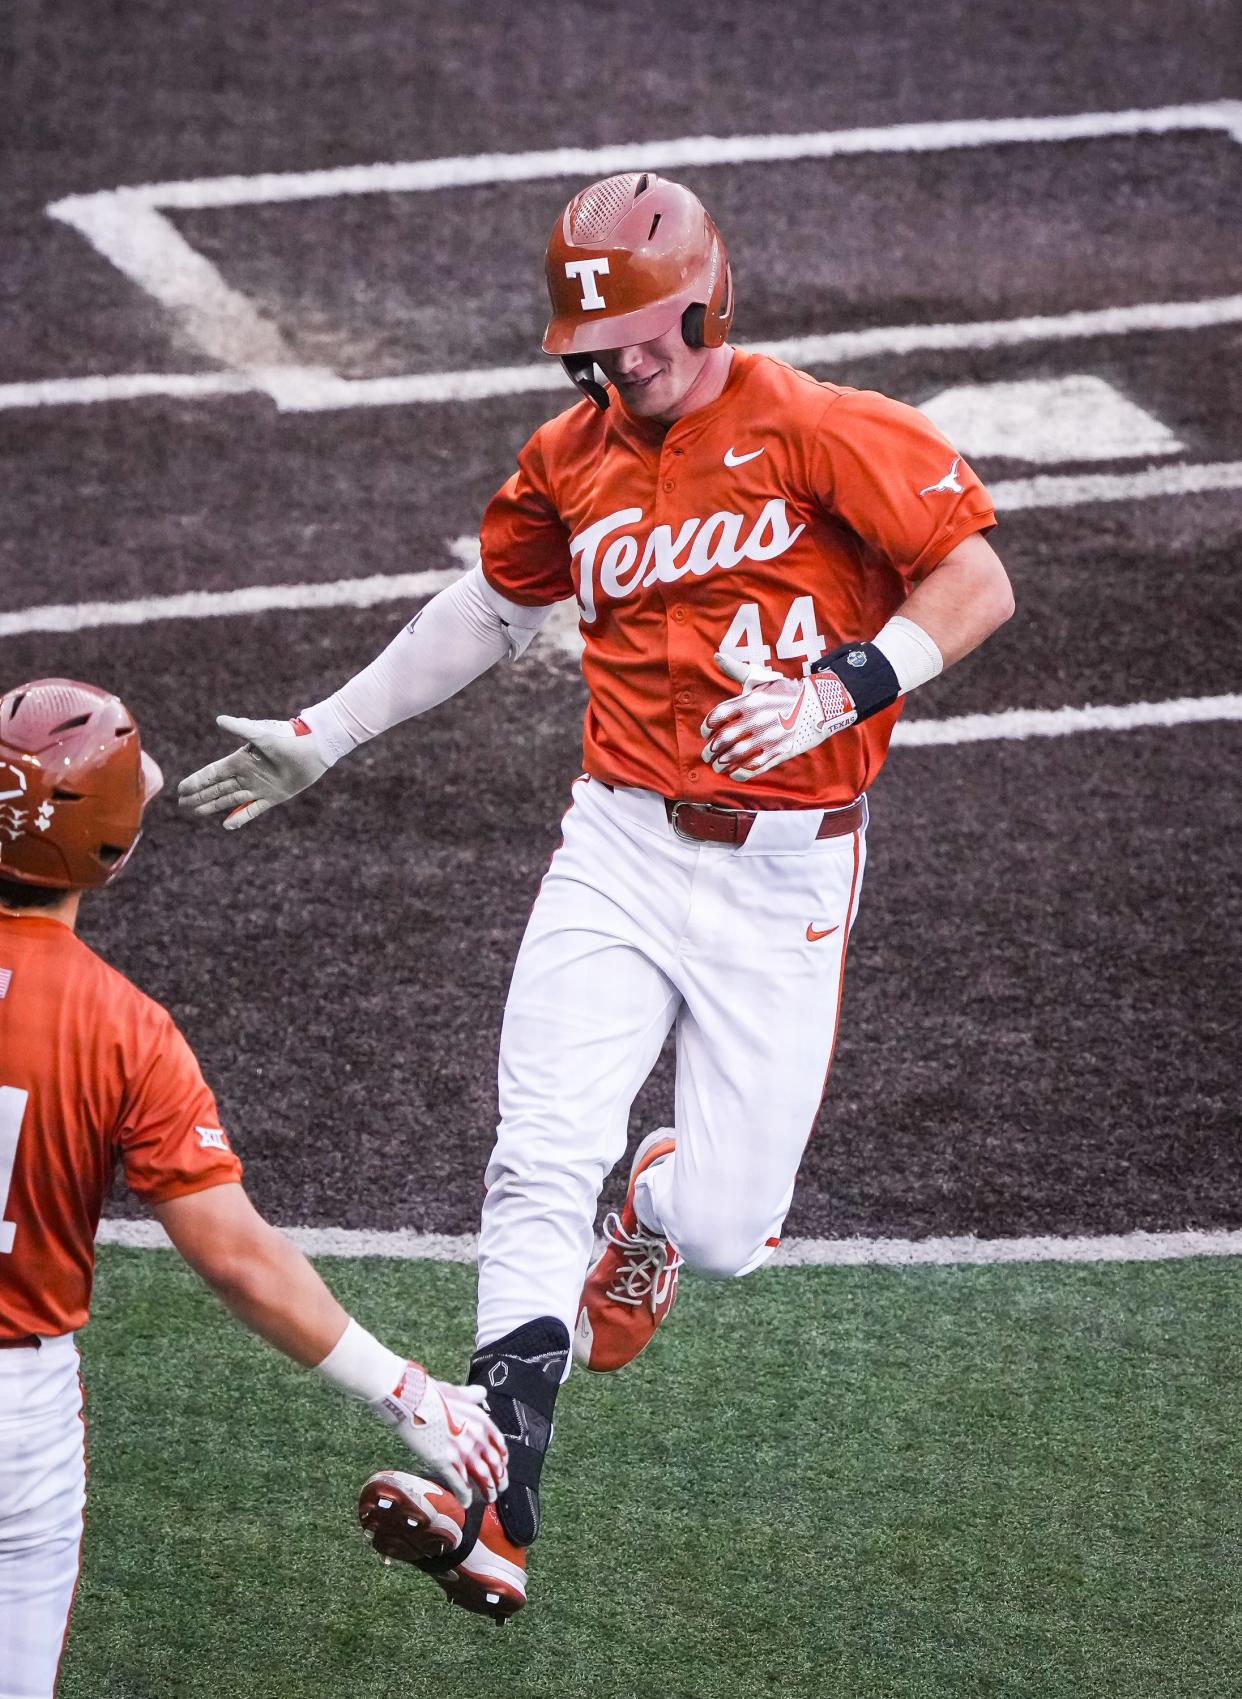 Texas outfielder Max Belyeu celebrates his home run against UT-Arlington on April 23. He hit his team-leading 17th homer of the season in Saturday's 6-3 win over Oklahoma State. "We know we can accomplish anything just staying together," he said.